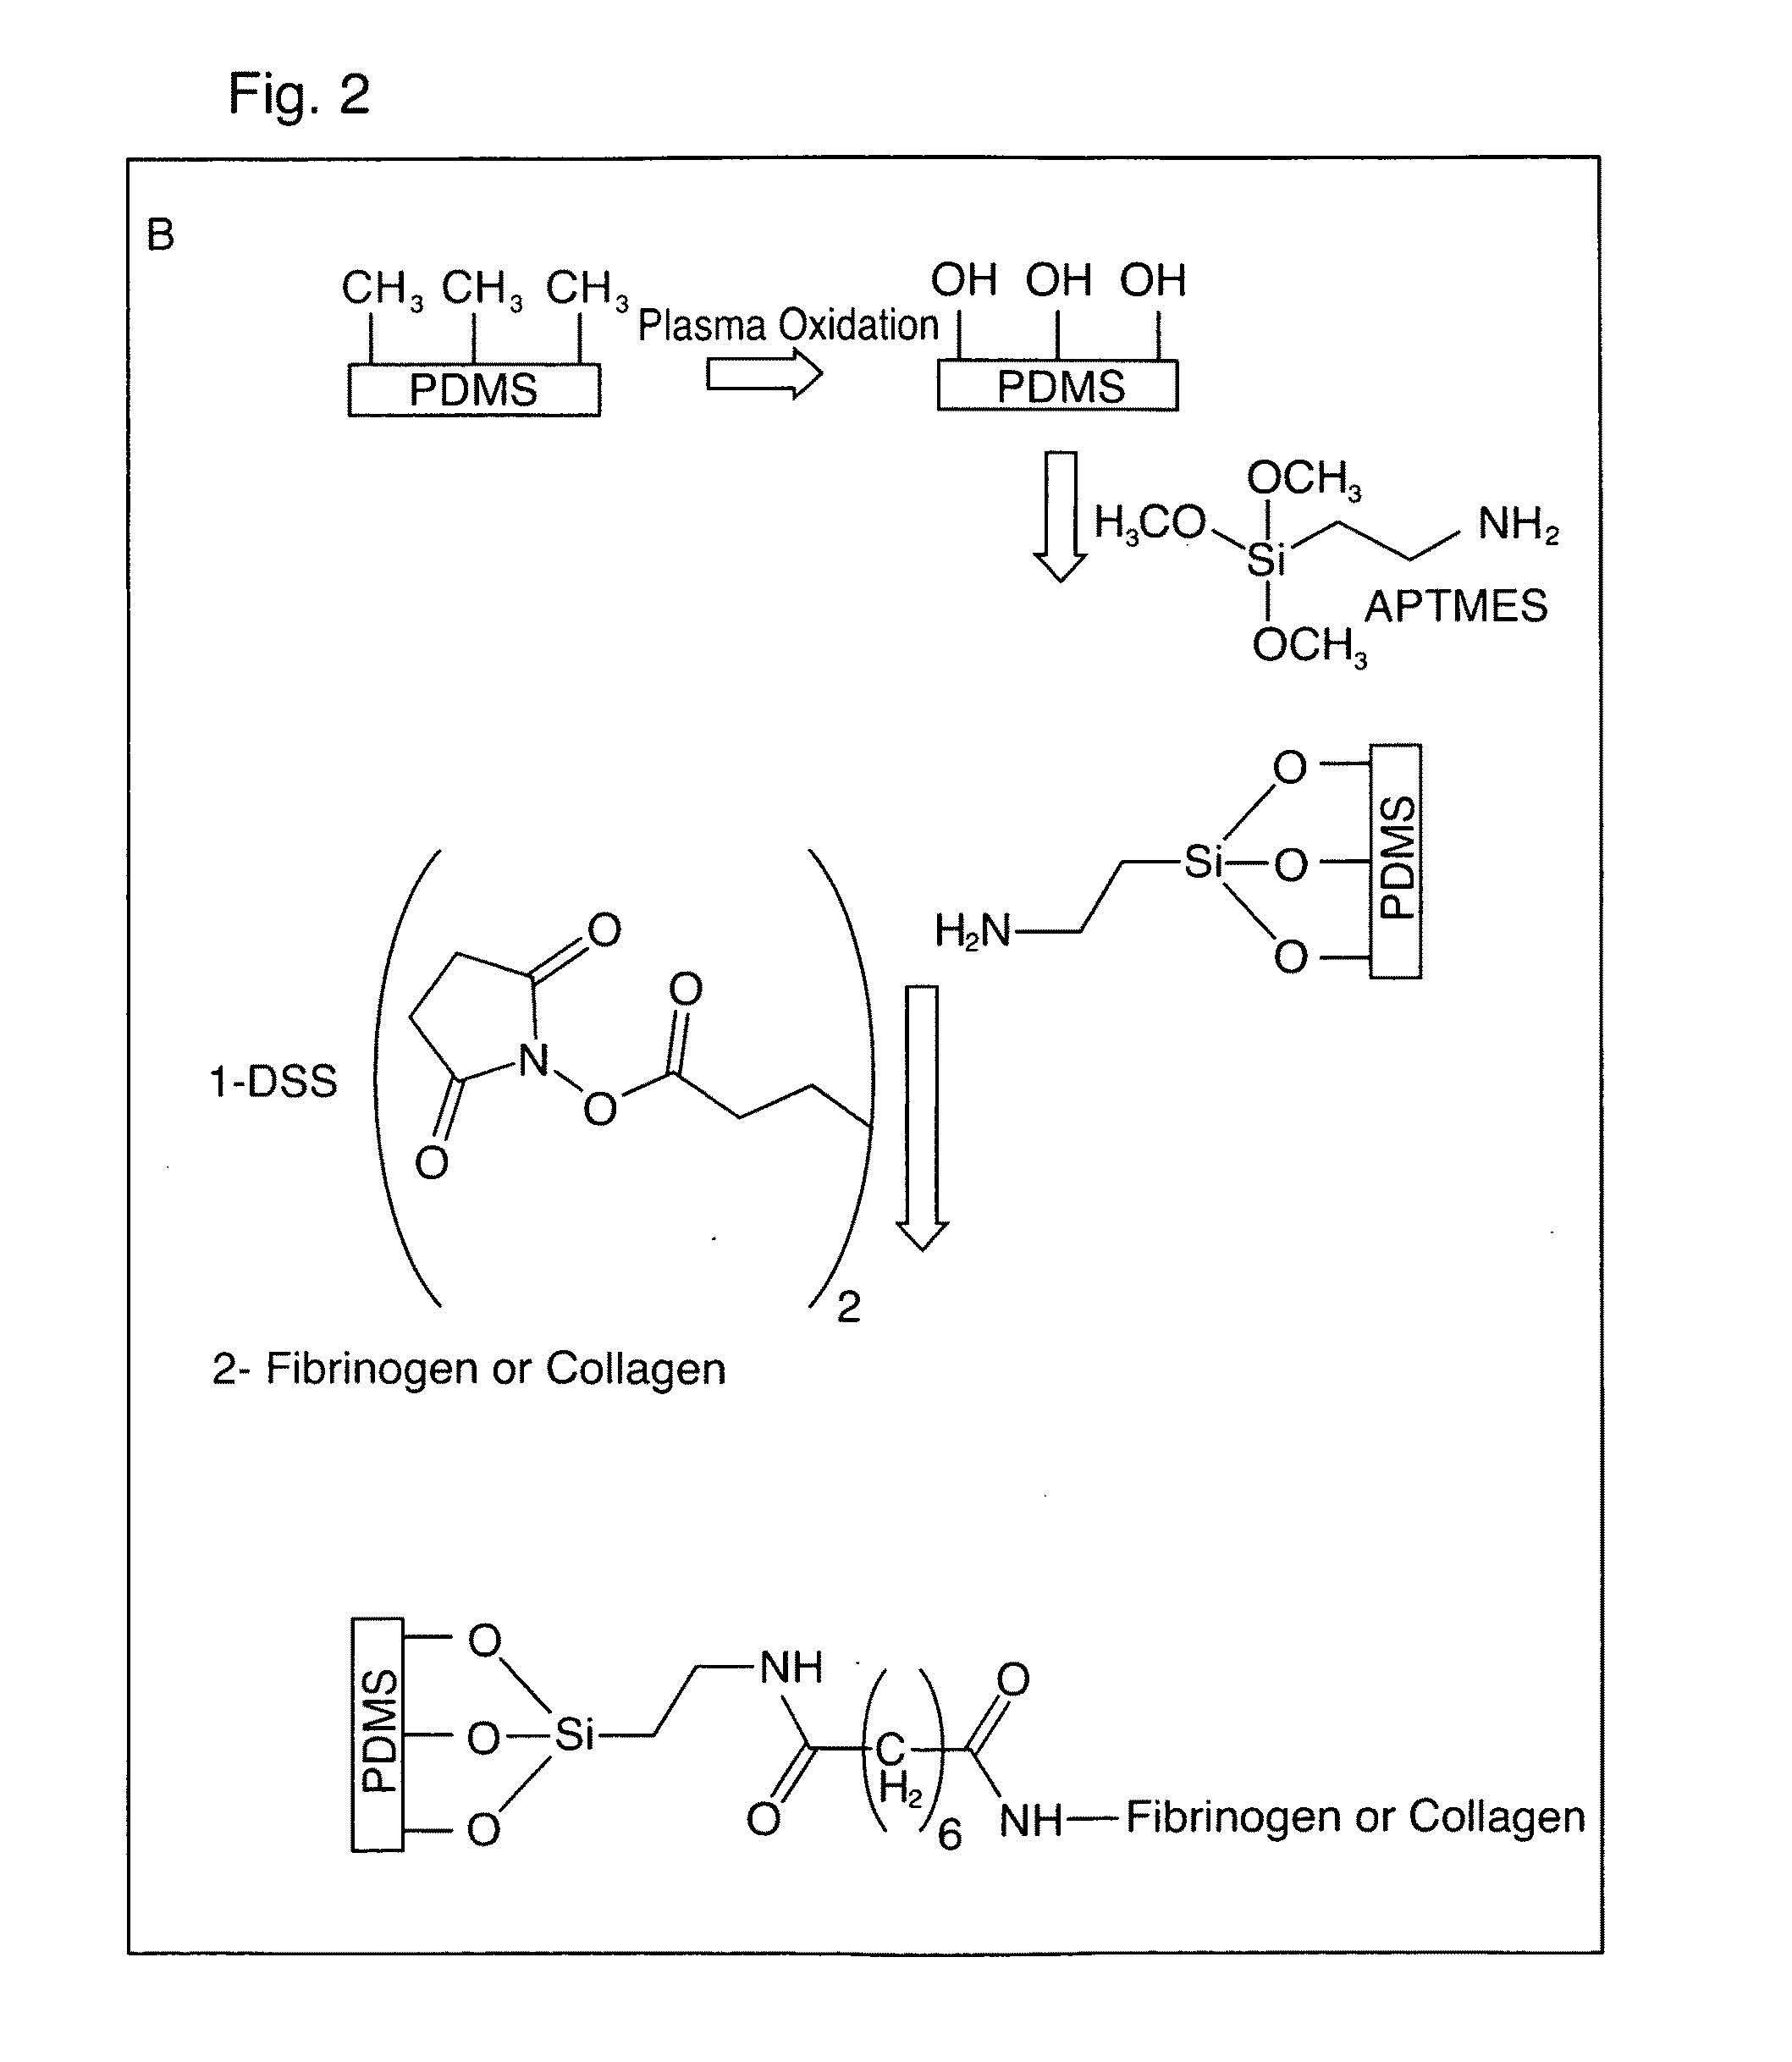 Method and apparatus to conduct kinetic analysis of platelet function in whole blood samples